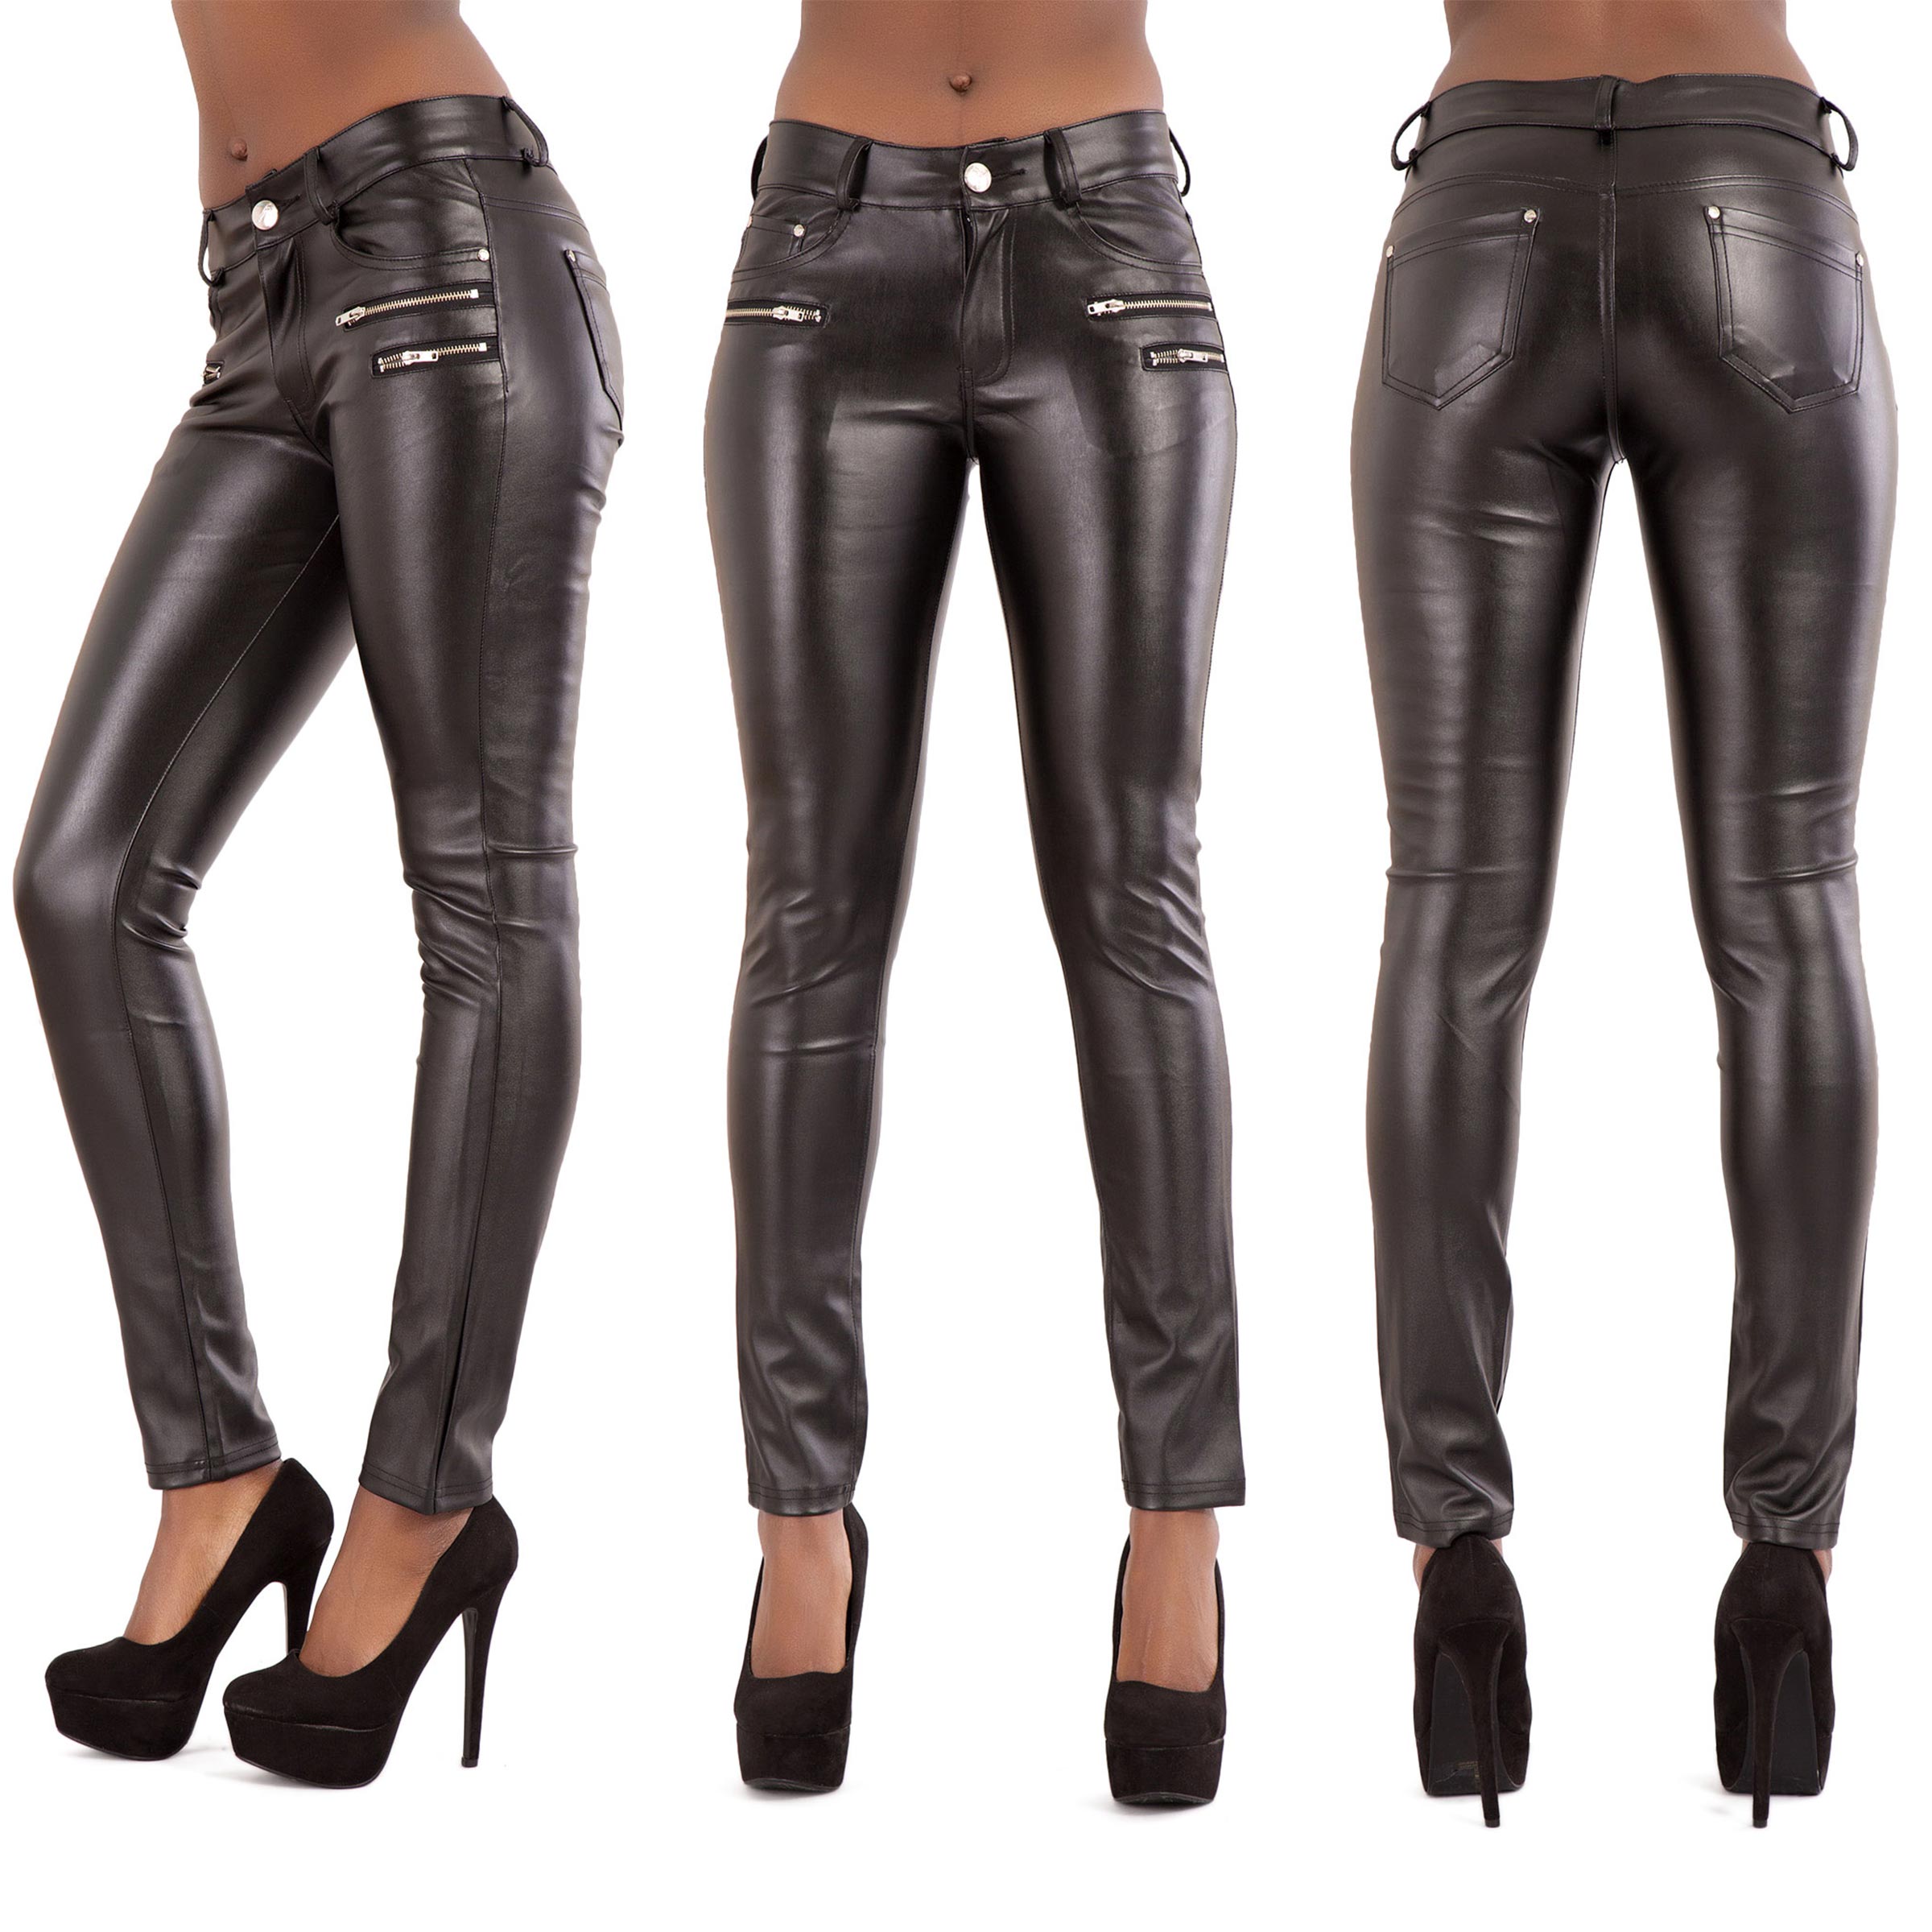 WOMEN'S BLACK PU LEATHER LOOK TROUSERS Breathable Slim Pants Sexy ...